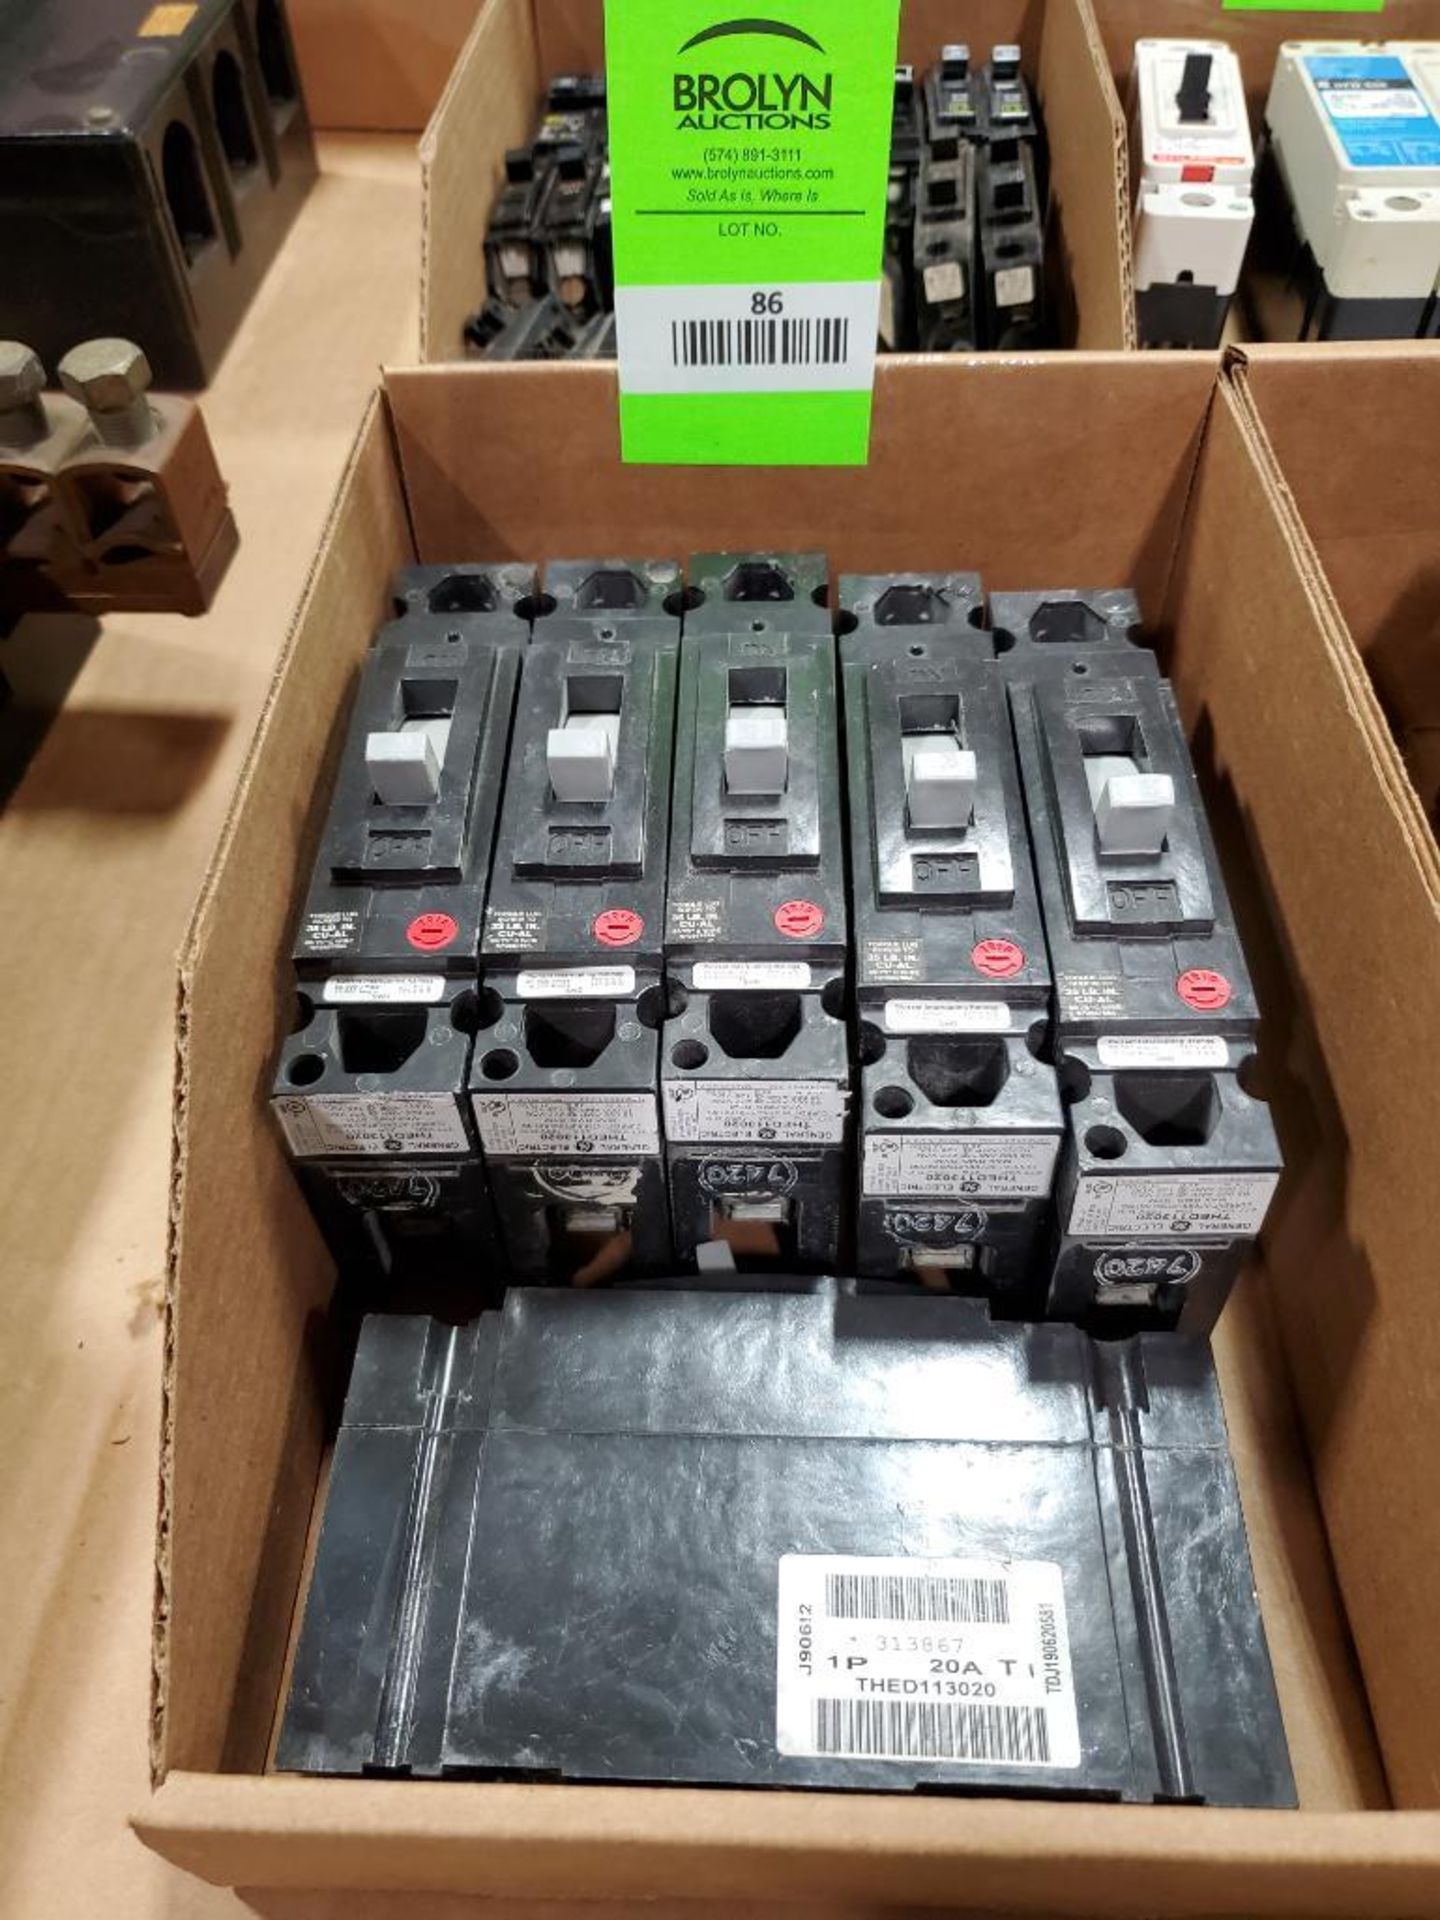 Qty 6 - GE 20AMP THED1113020 circuit breaker.